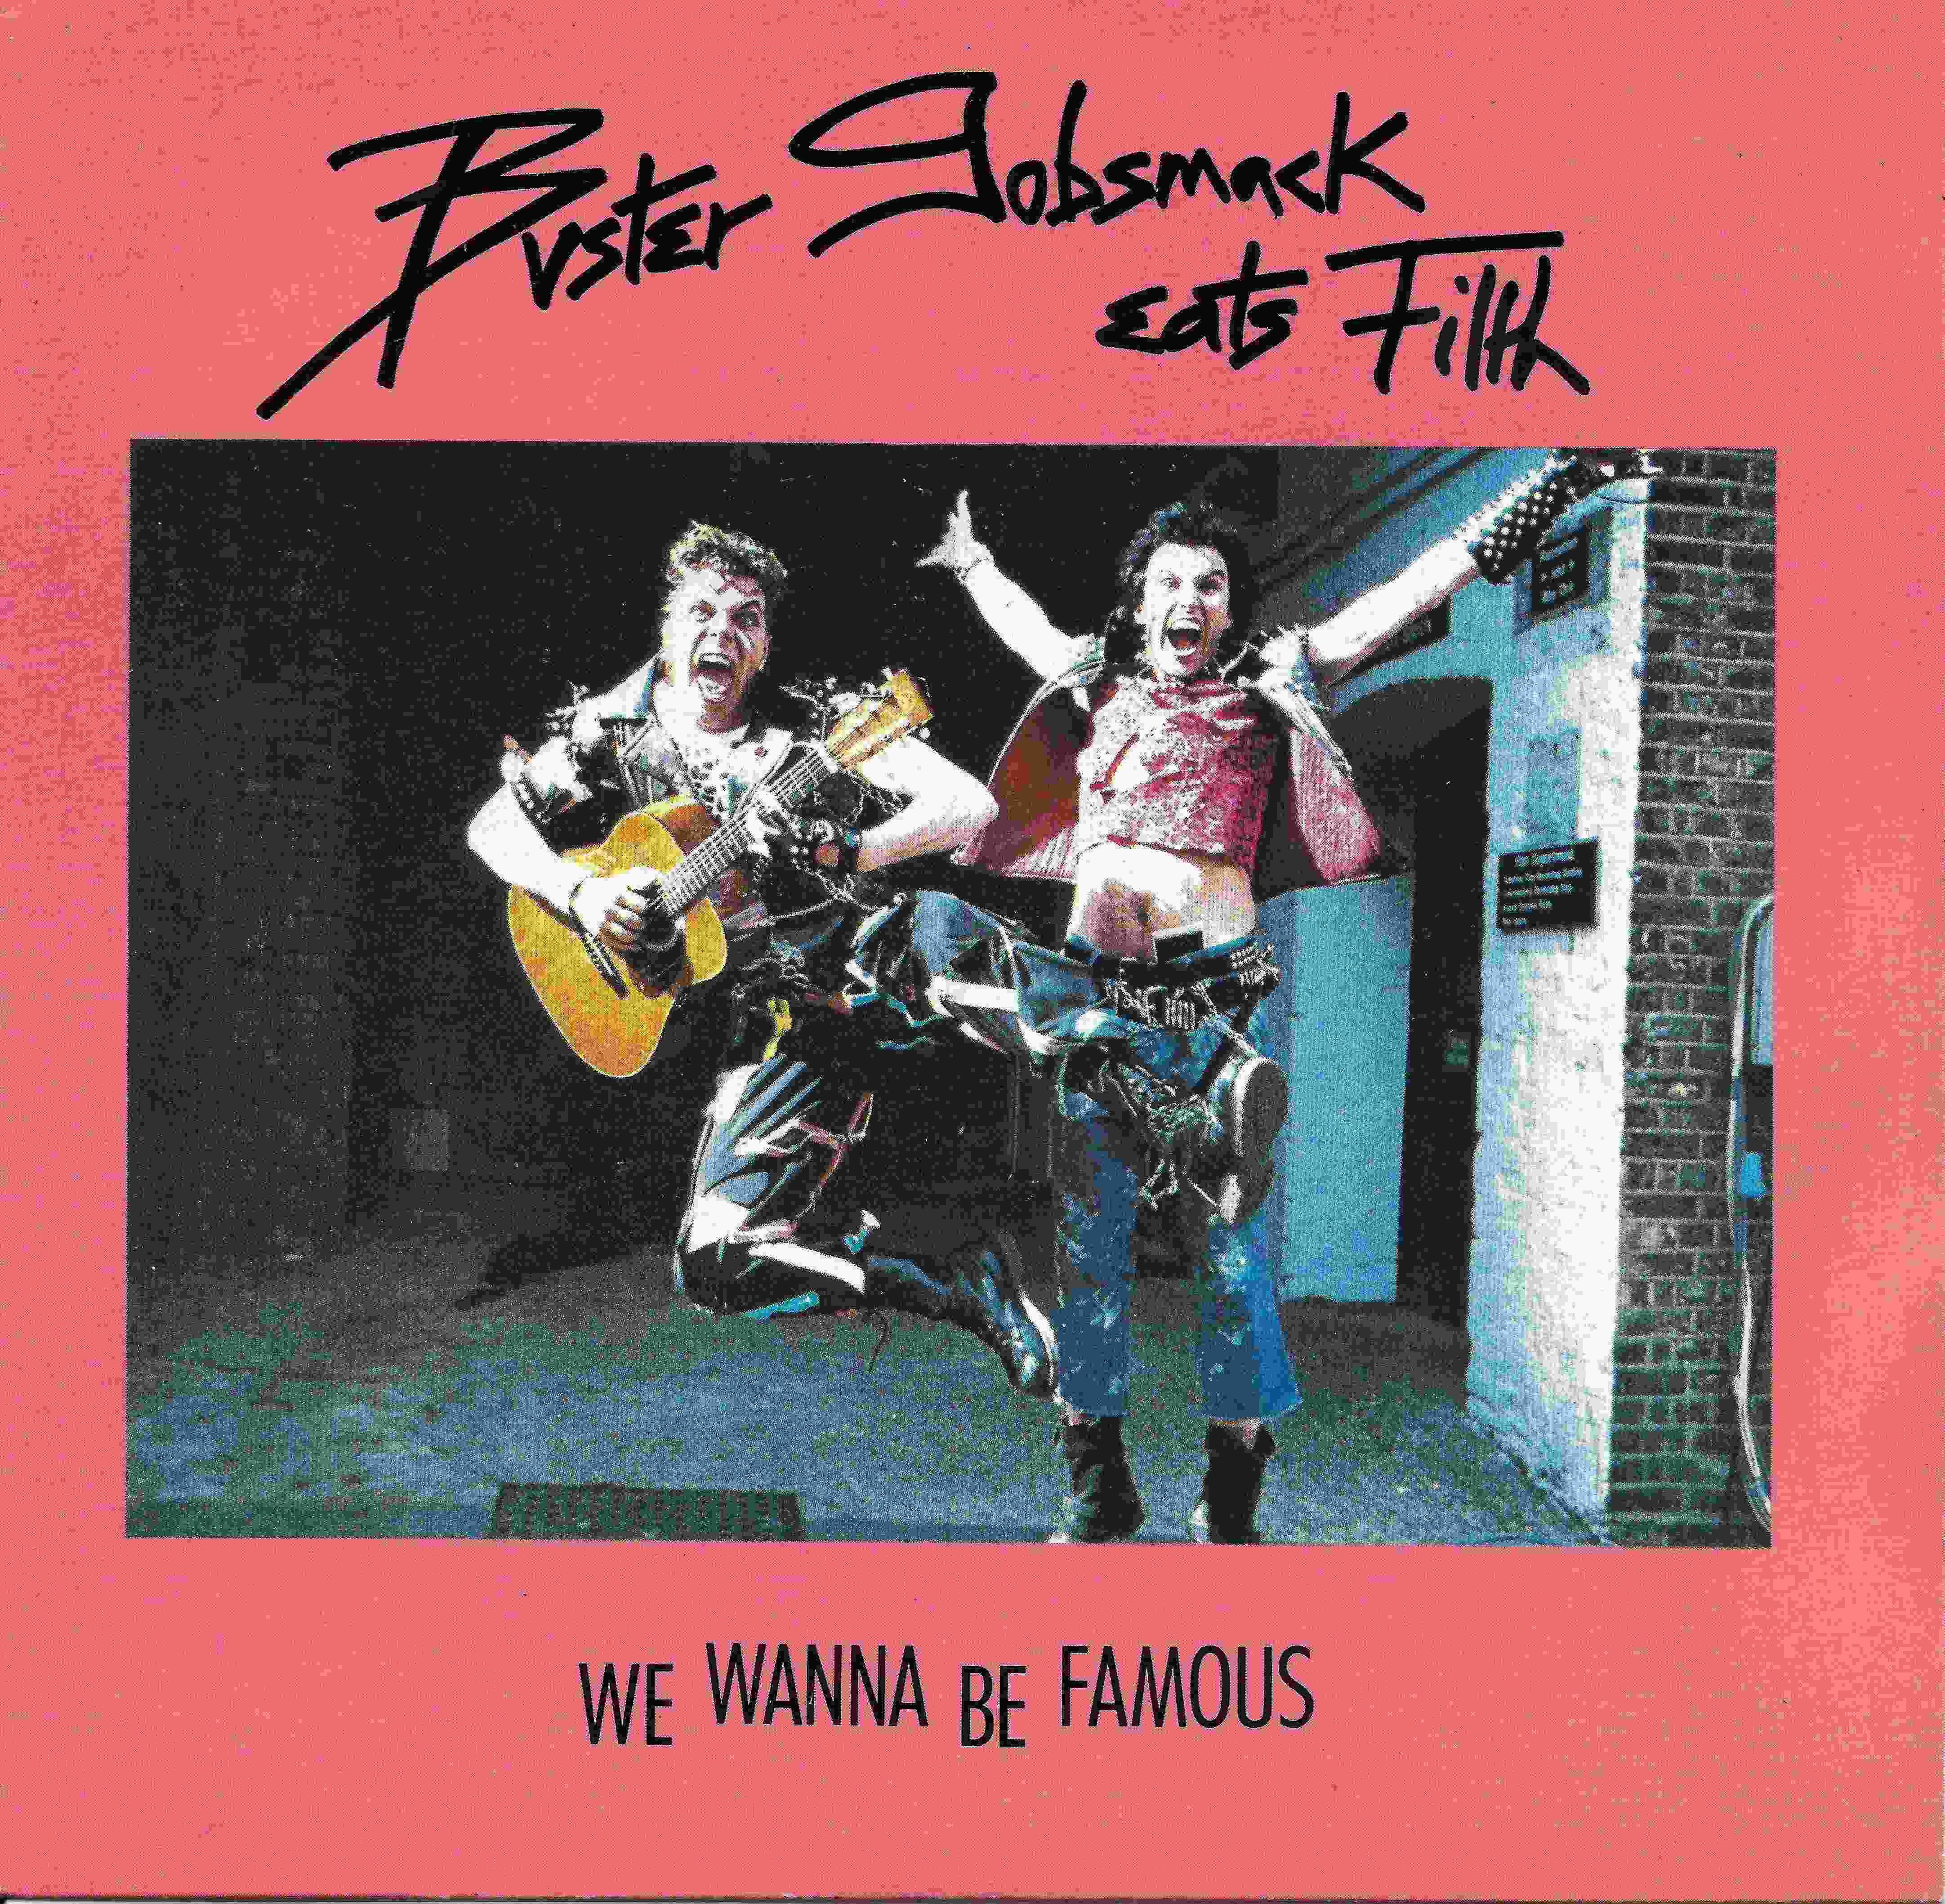 Picture of RESL 226 We wanna be famous (That's life) by artist Buster Gobsmack Eats Filth / El Shaftit & the Timeshares from the BBC singles - Records and Tapes library